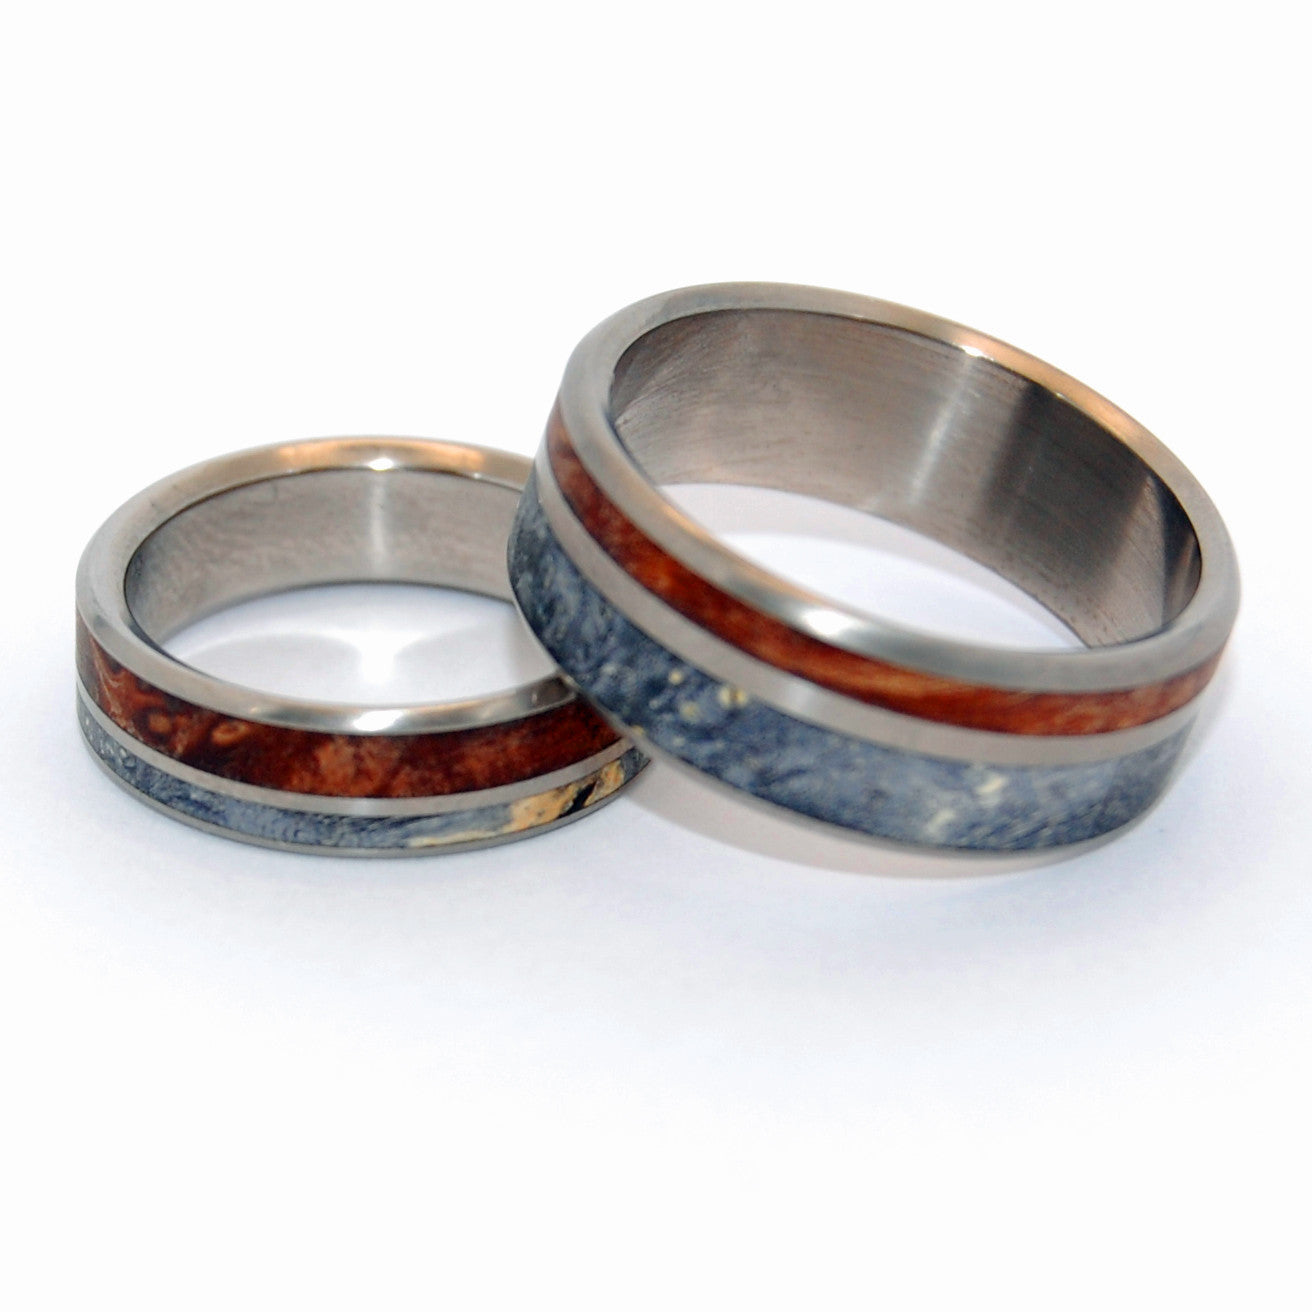 TO HAVE AND HOLD | Dark Maple Wood & Black Box Elder Wood - Wooden Wedding Rings - Minter and Richter Designs